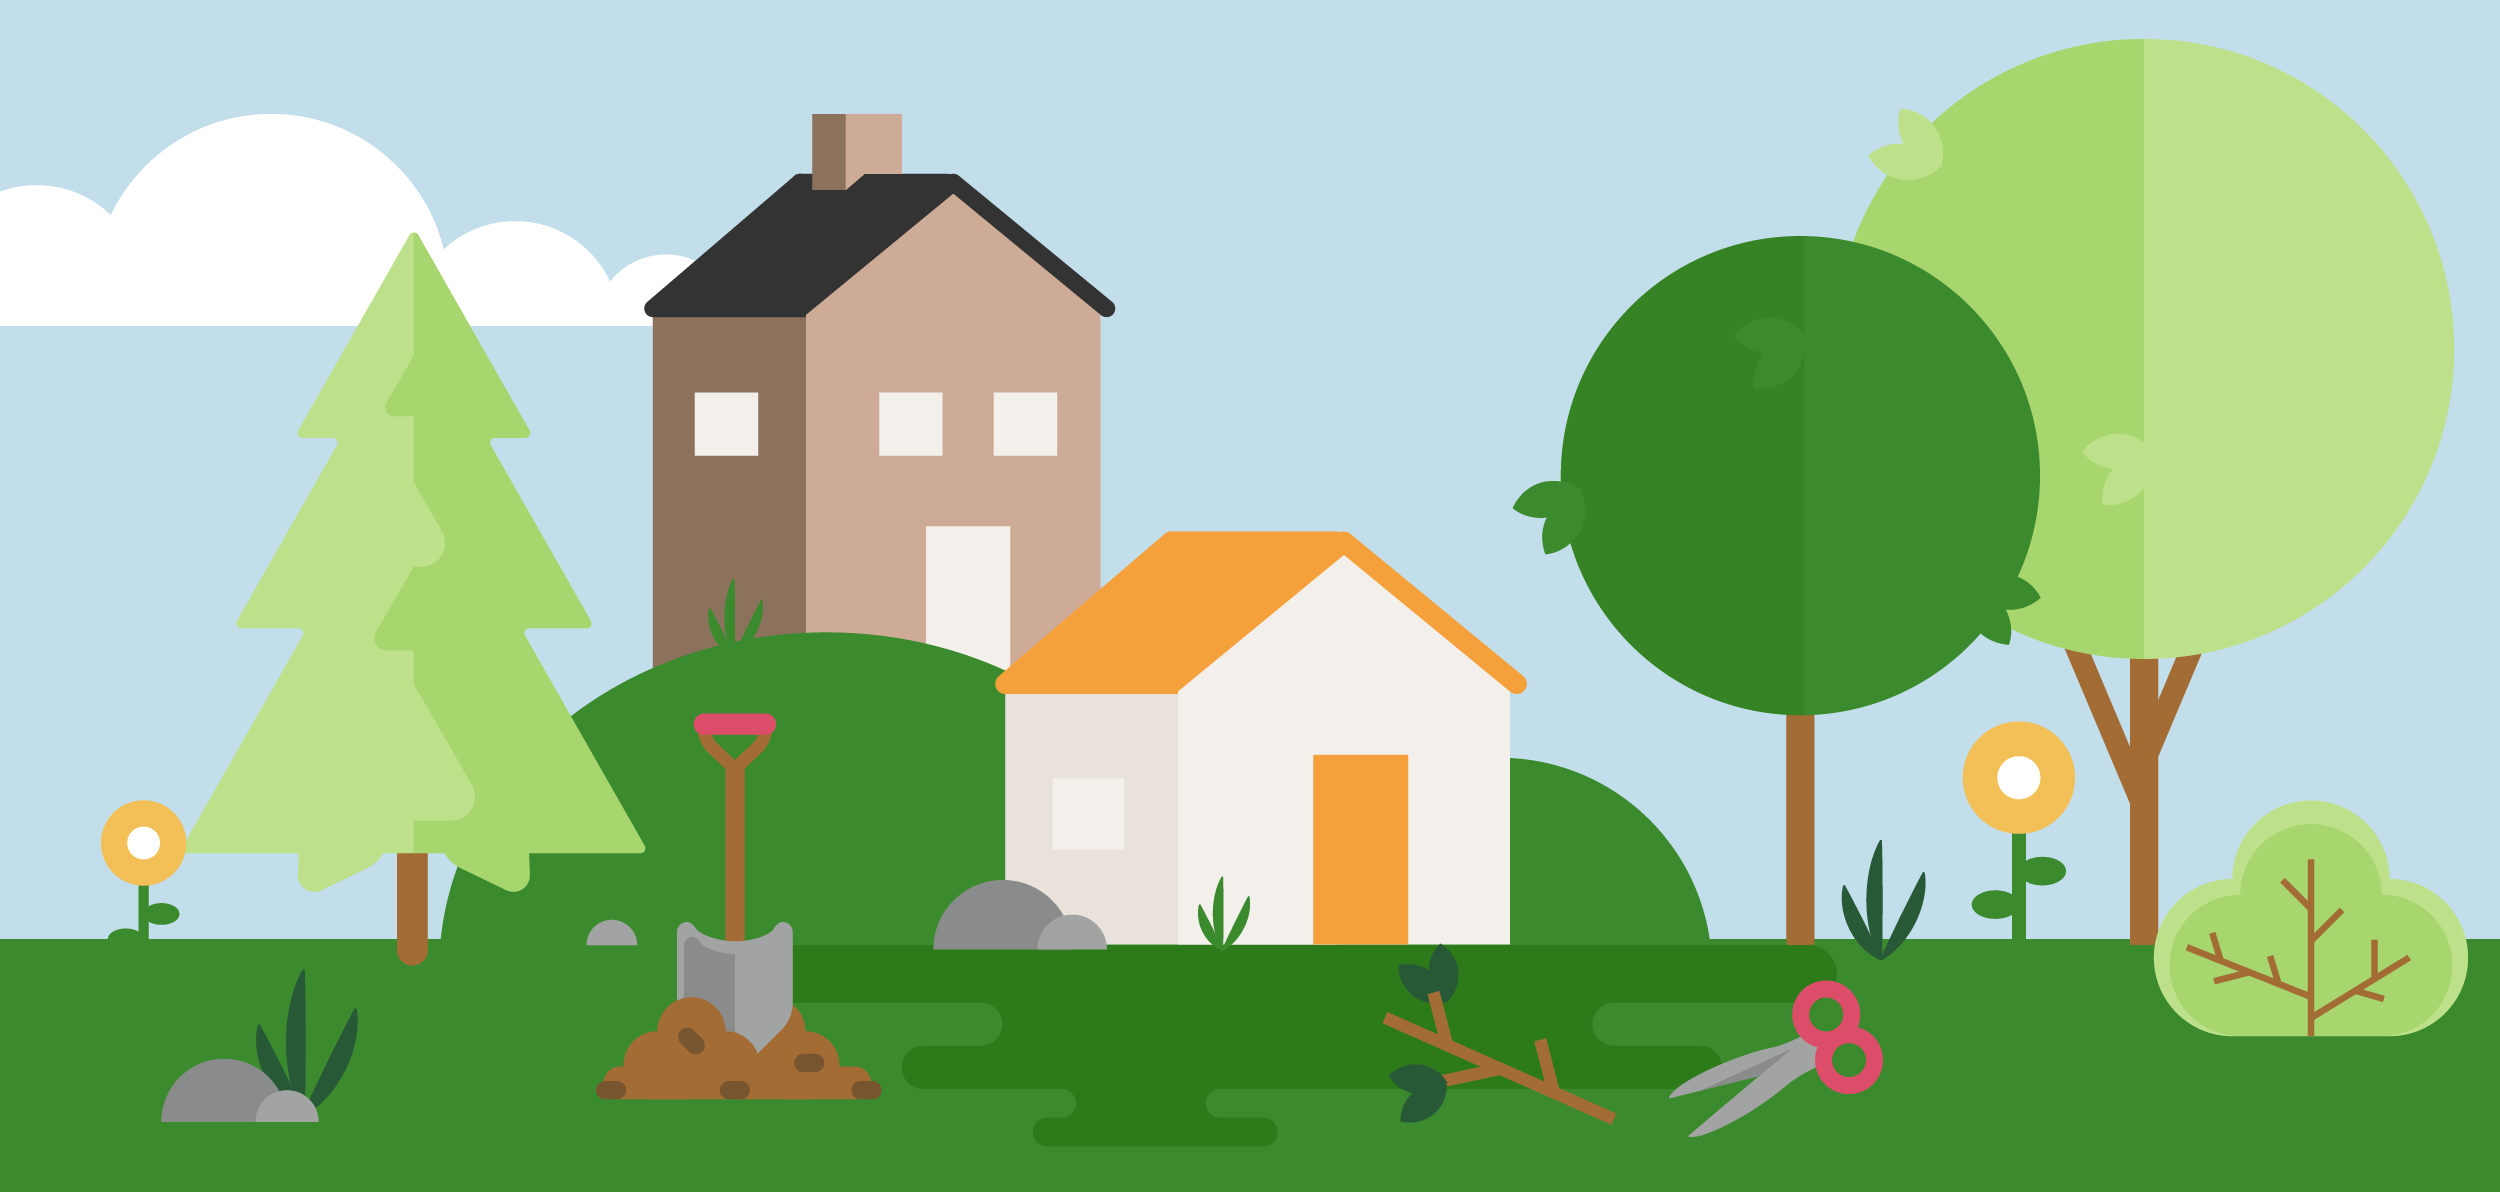 Illustration of house with trees and a pair of pruners.